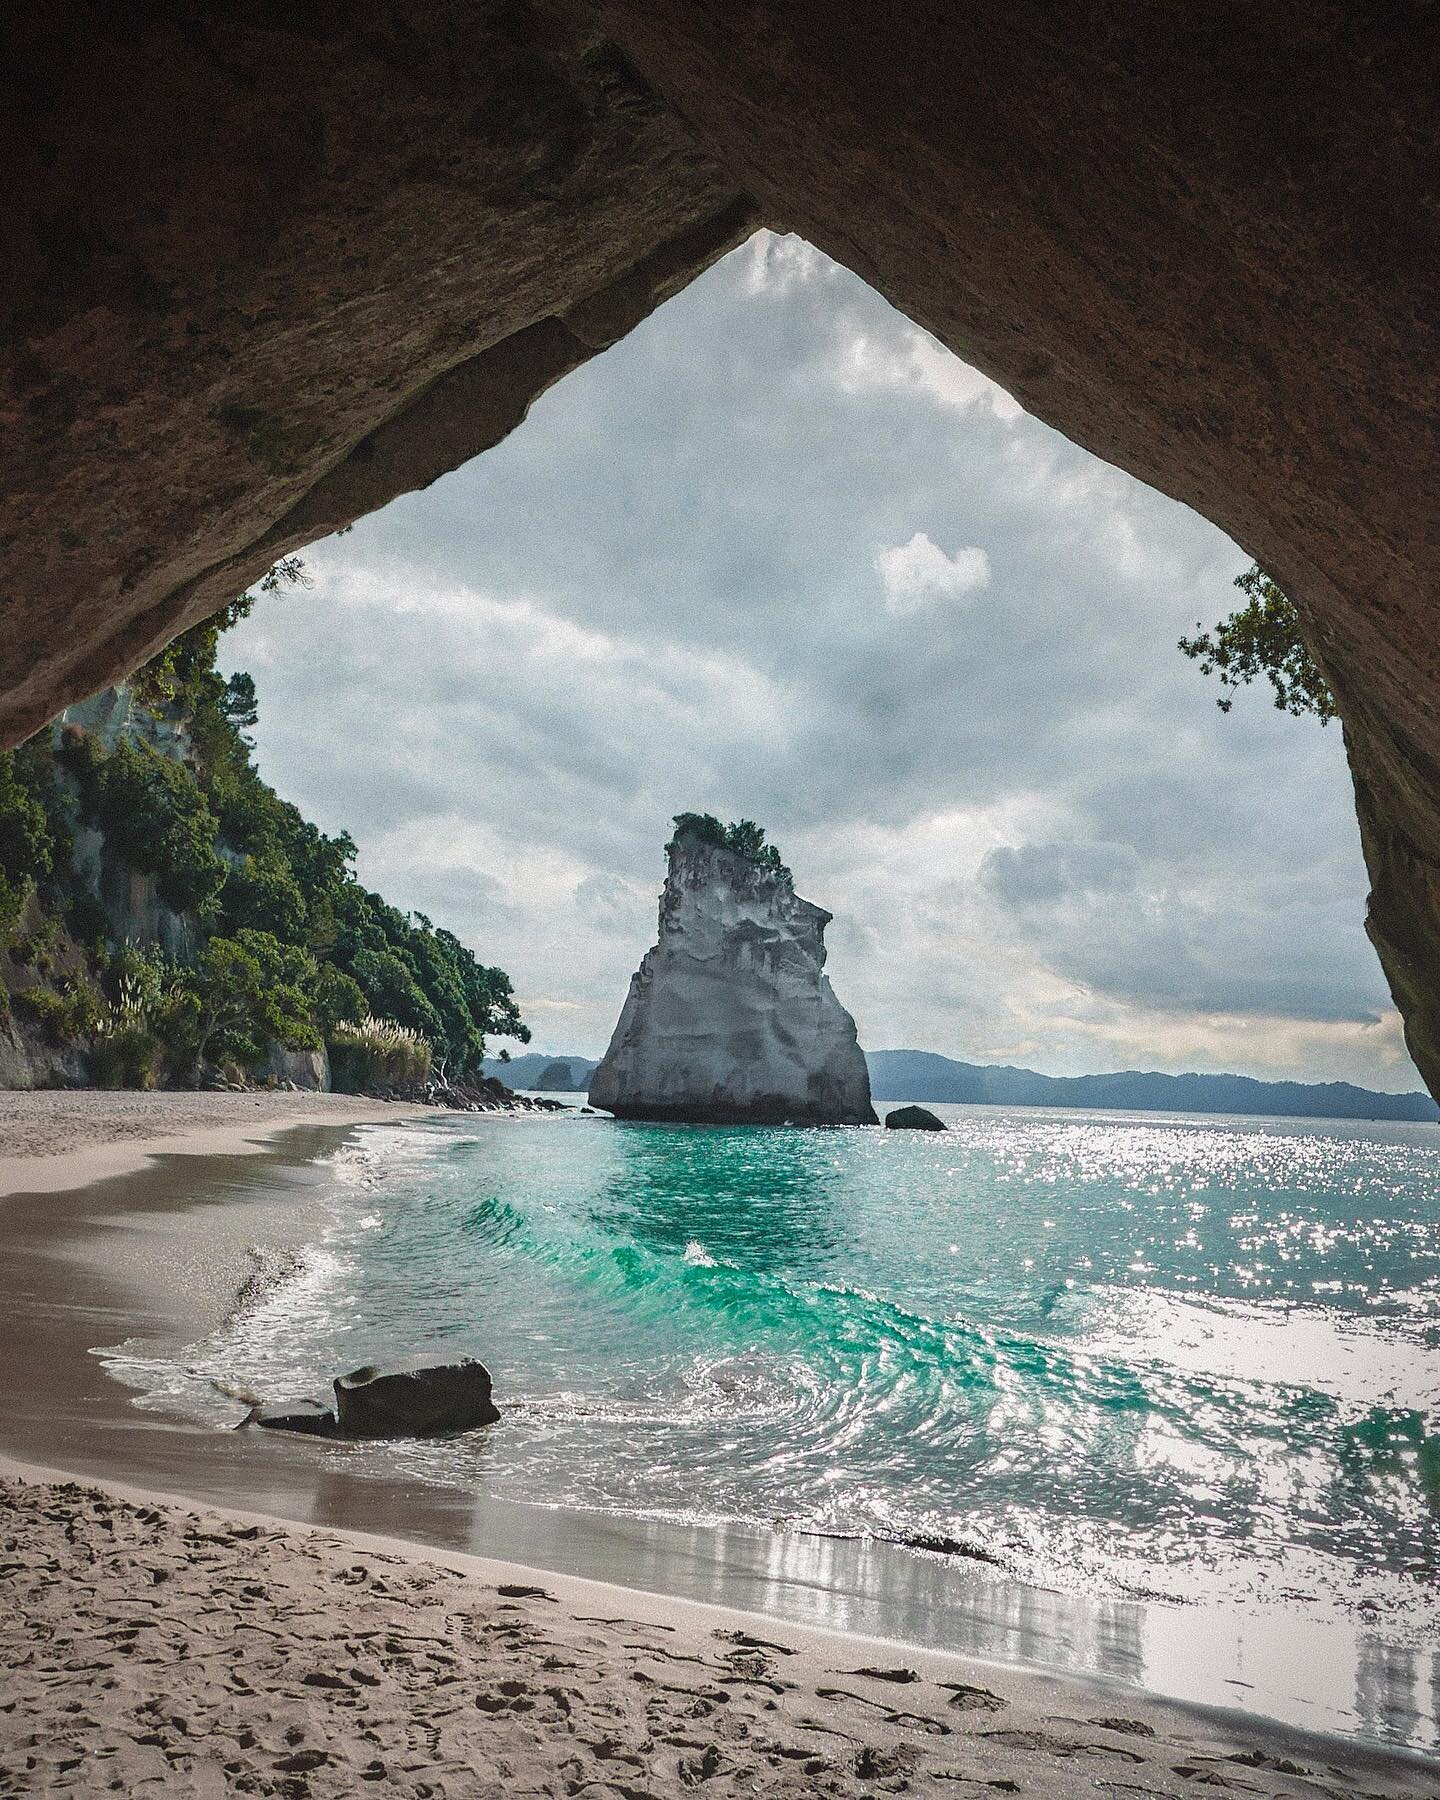 Cathedral Cove, famous for its beauty, but also apparently that scene in The Chronicles of Narnia: Prince Caspian where the Pevensie children first re-enter Narnia. And for being the music video location for the song Can't Hold Us by Macklemore &amp;